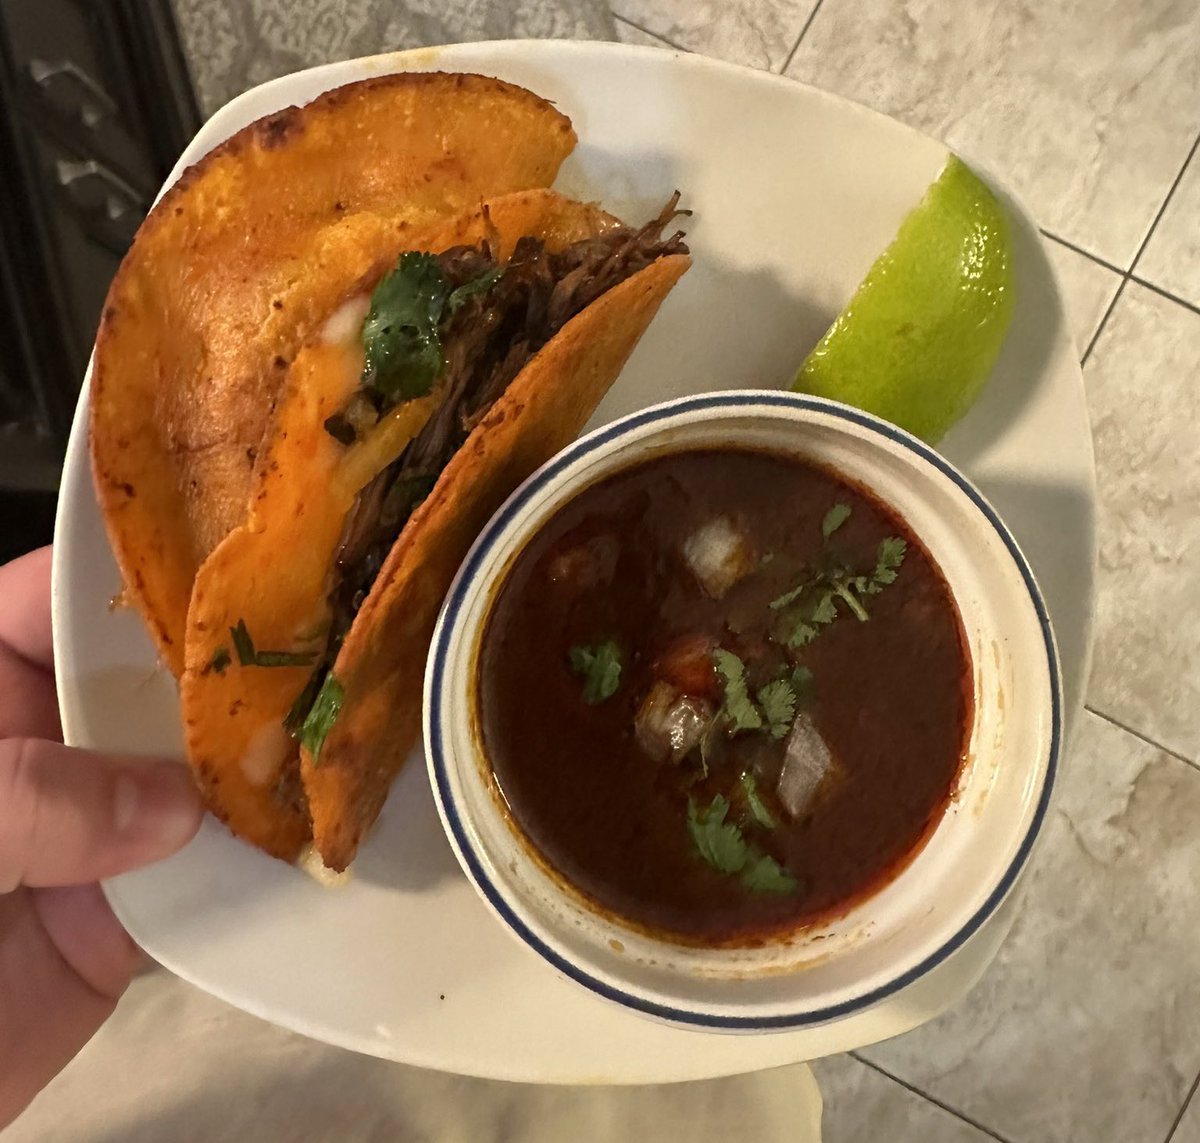 I made these tacos from scratch for like $2